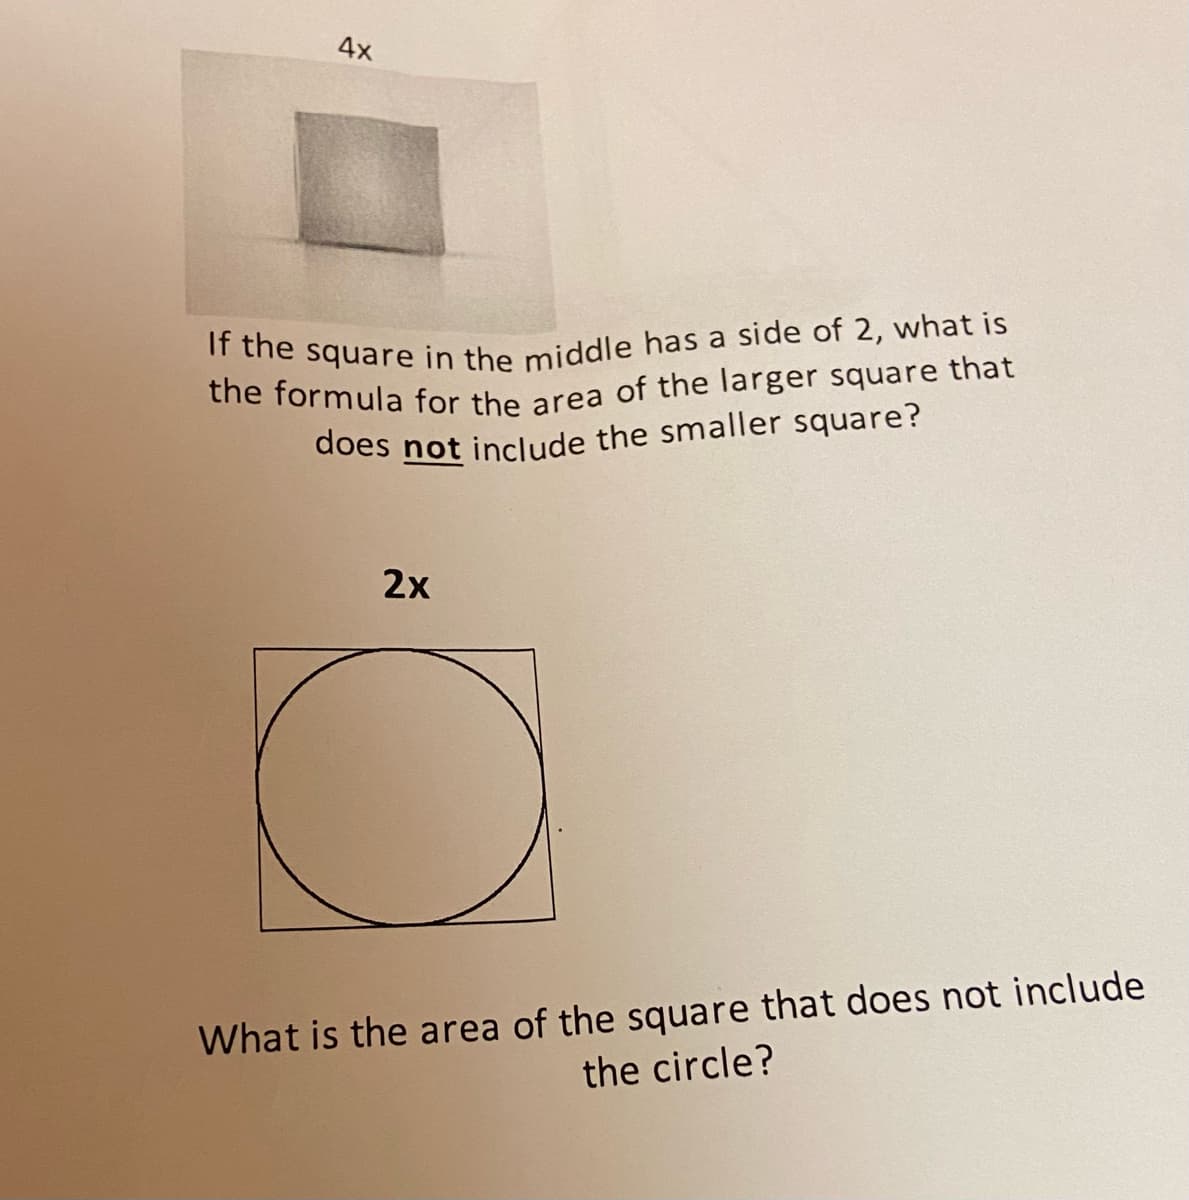 4x
If the square in the middle has a side of 2, what is
the formula for the area of the larger square that
does not include the smaller square?
2x
What is the area of the square that does not include
the circle?